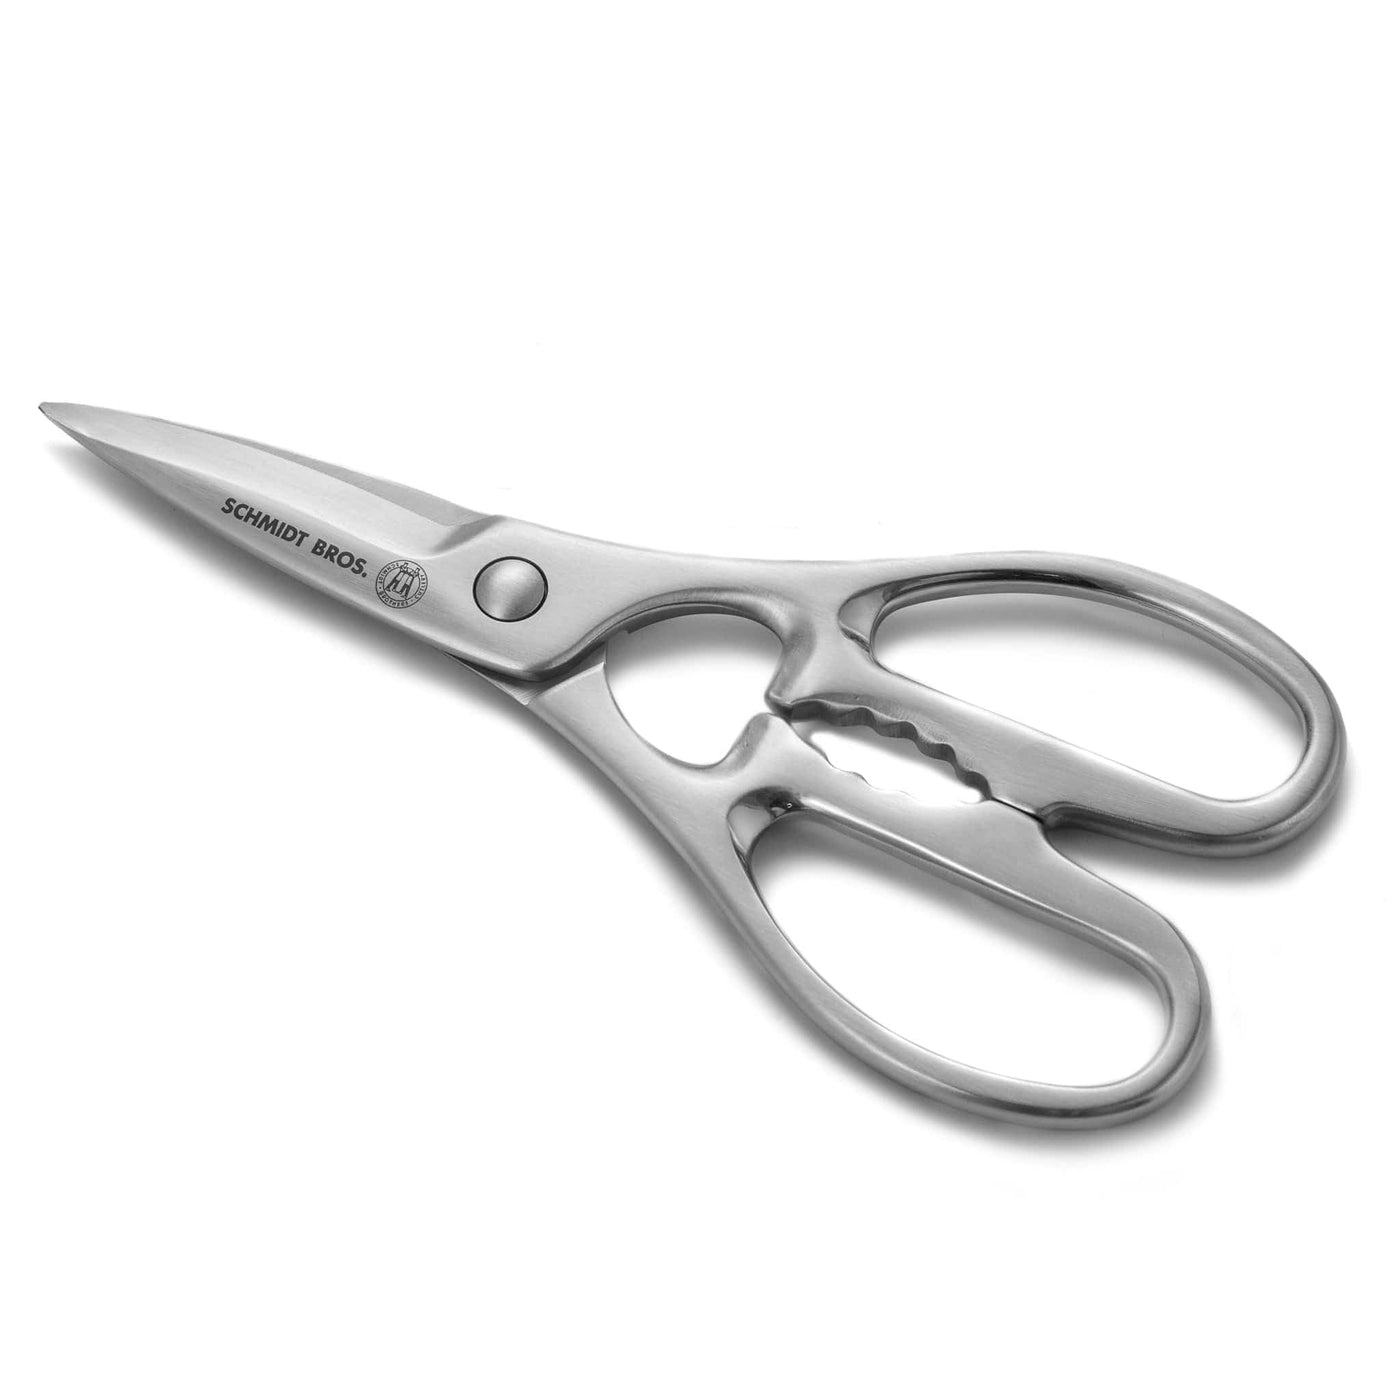 Lamson Forged Hi-Carbon Stainless Steel Kitchen Shears